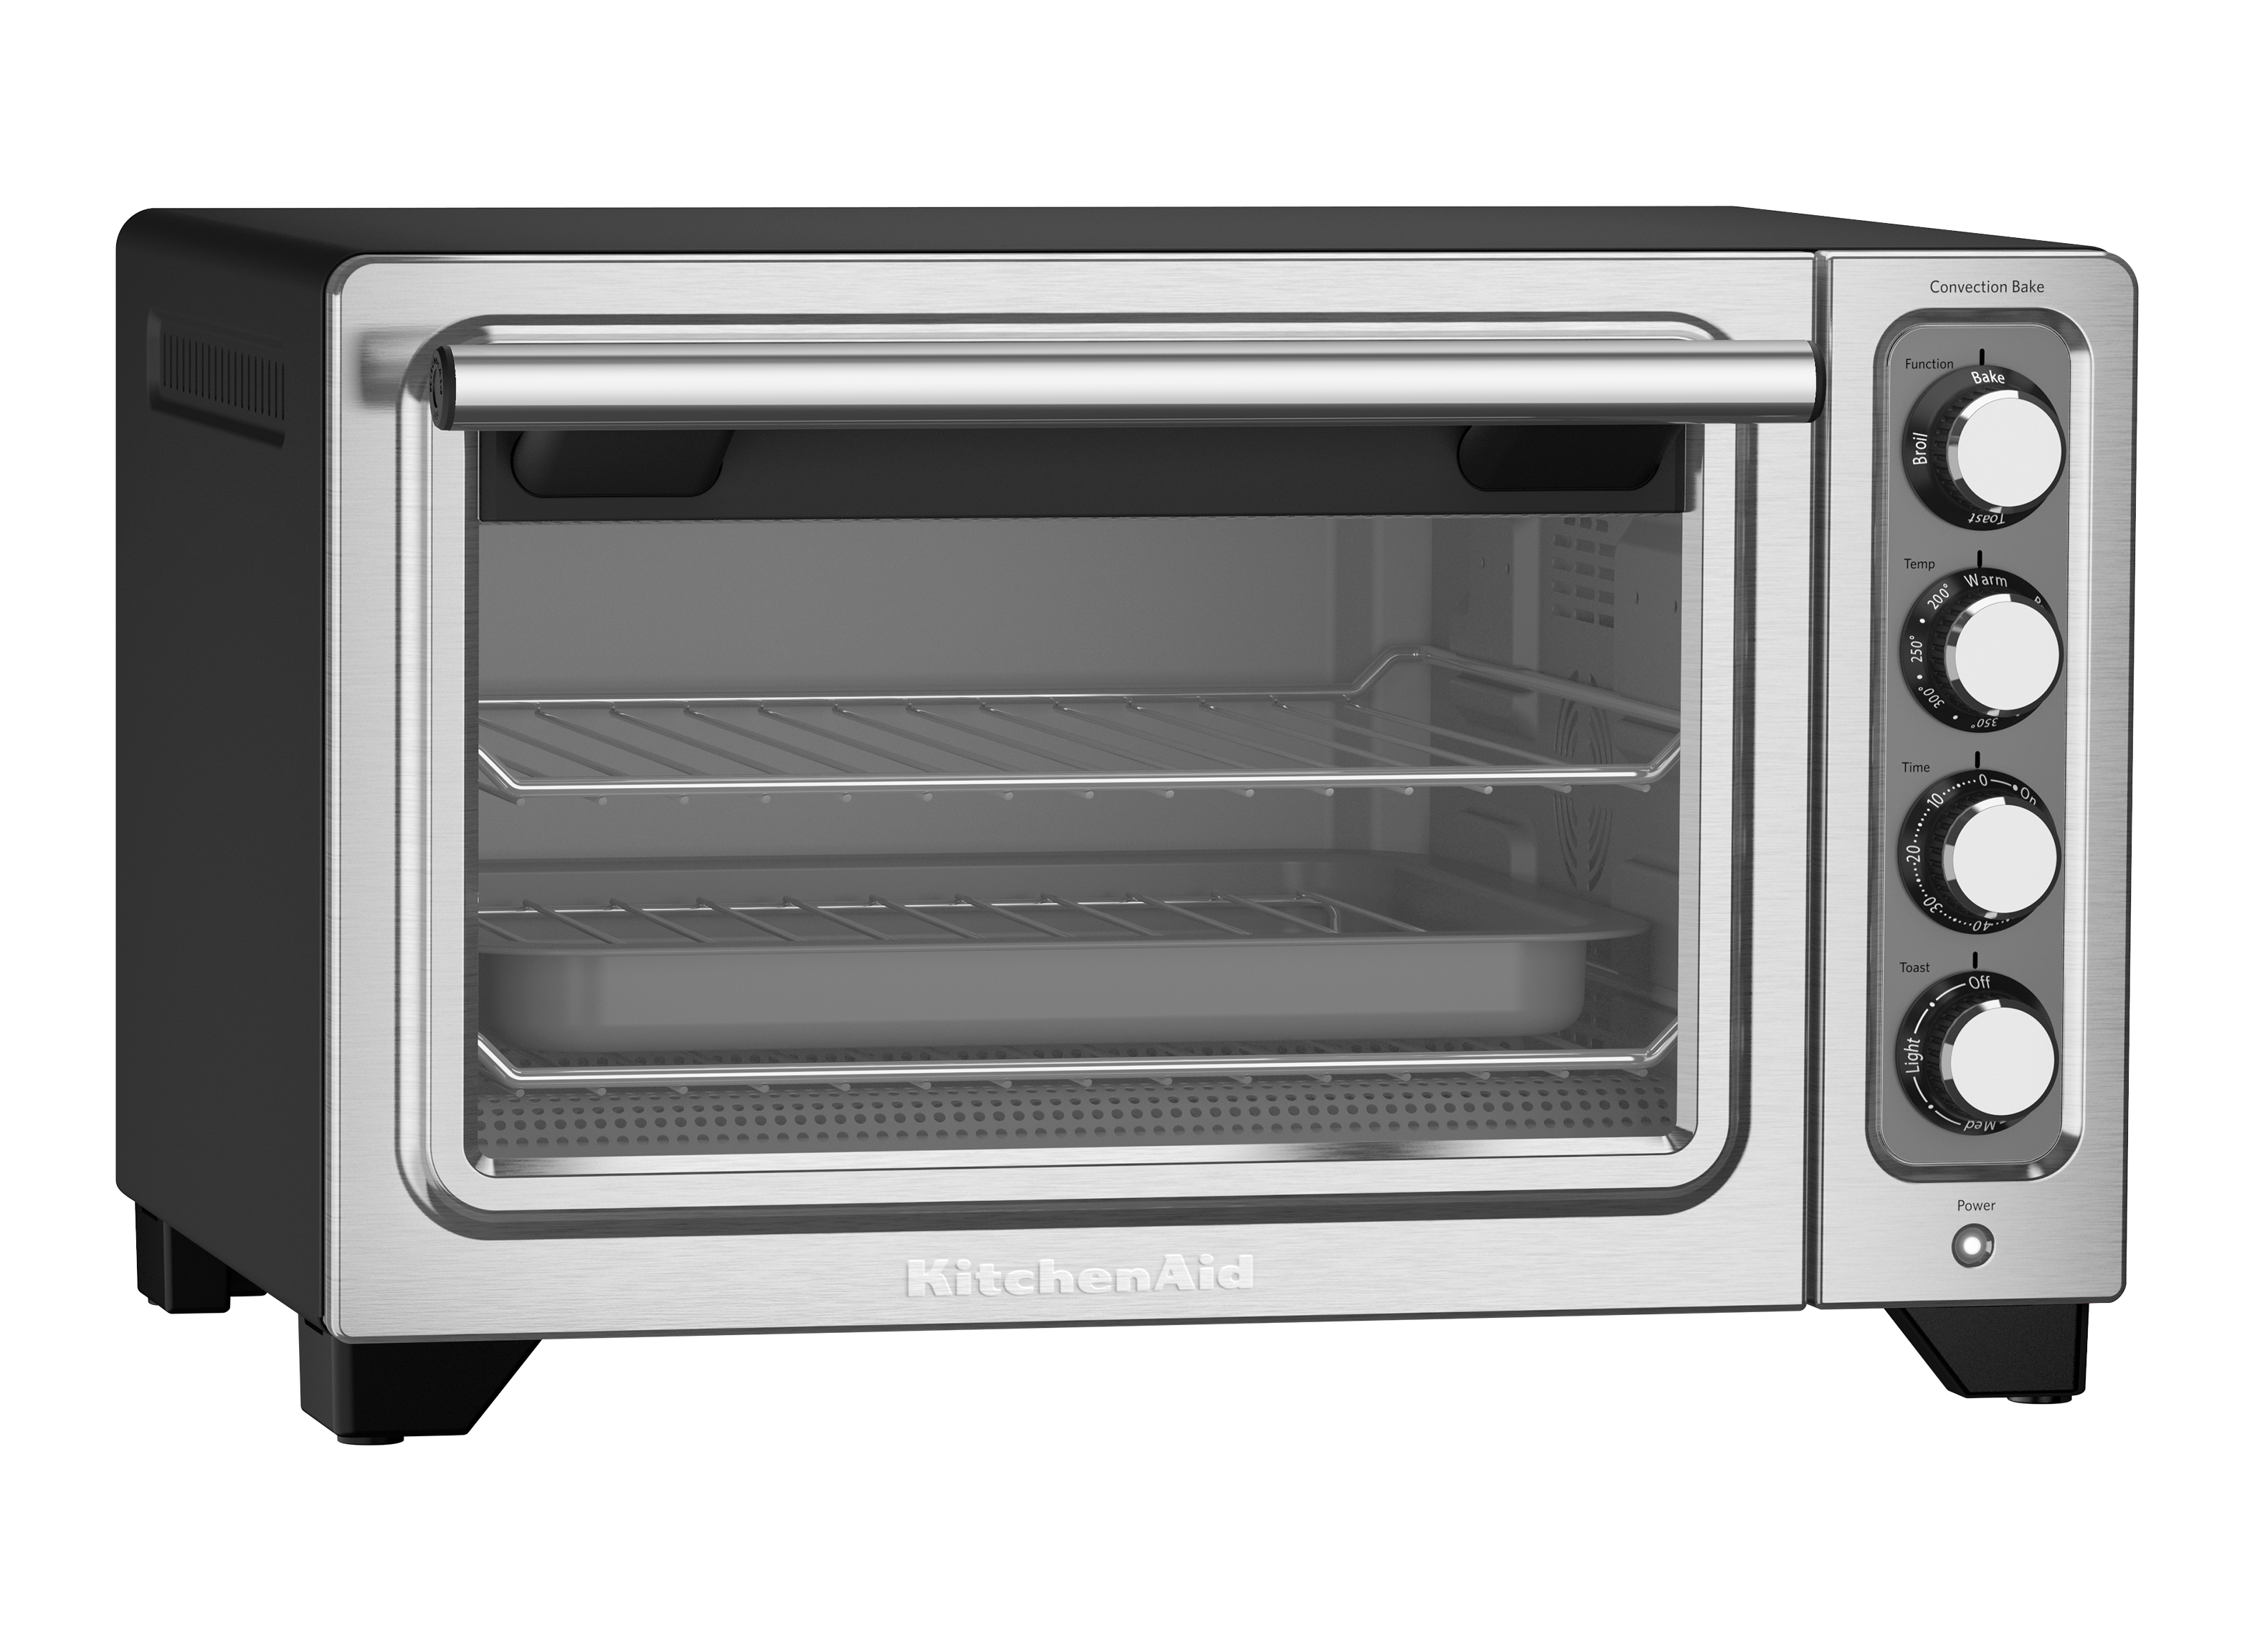 KitchenAid KCO124BM Toaster & Toaster Oven Review - Consumer Reports